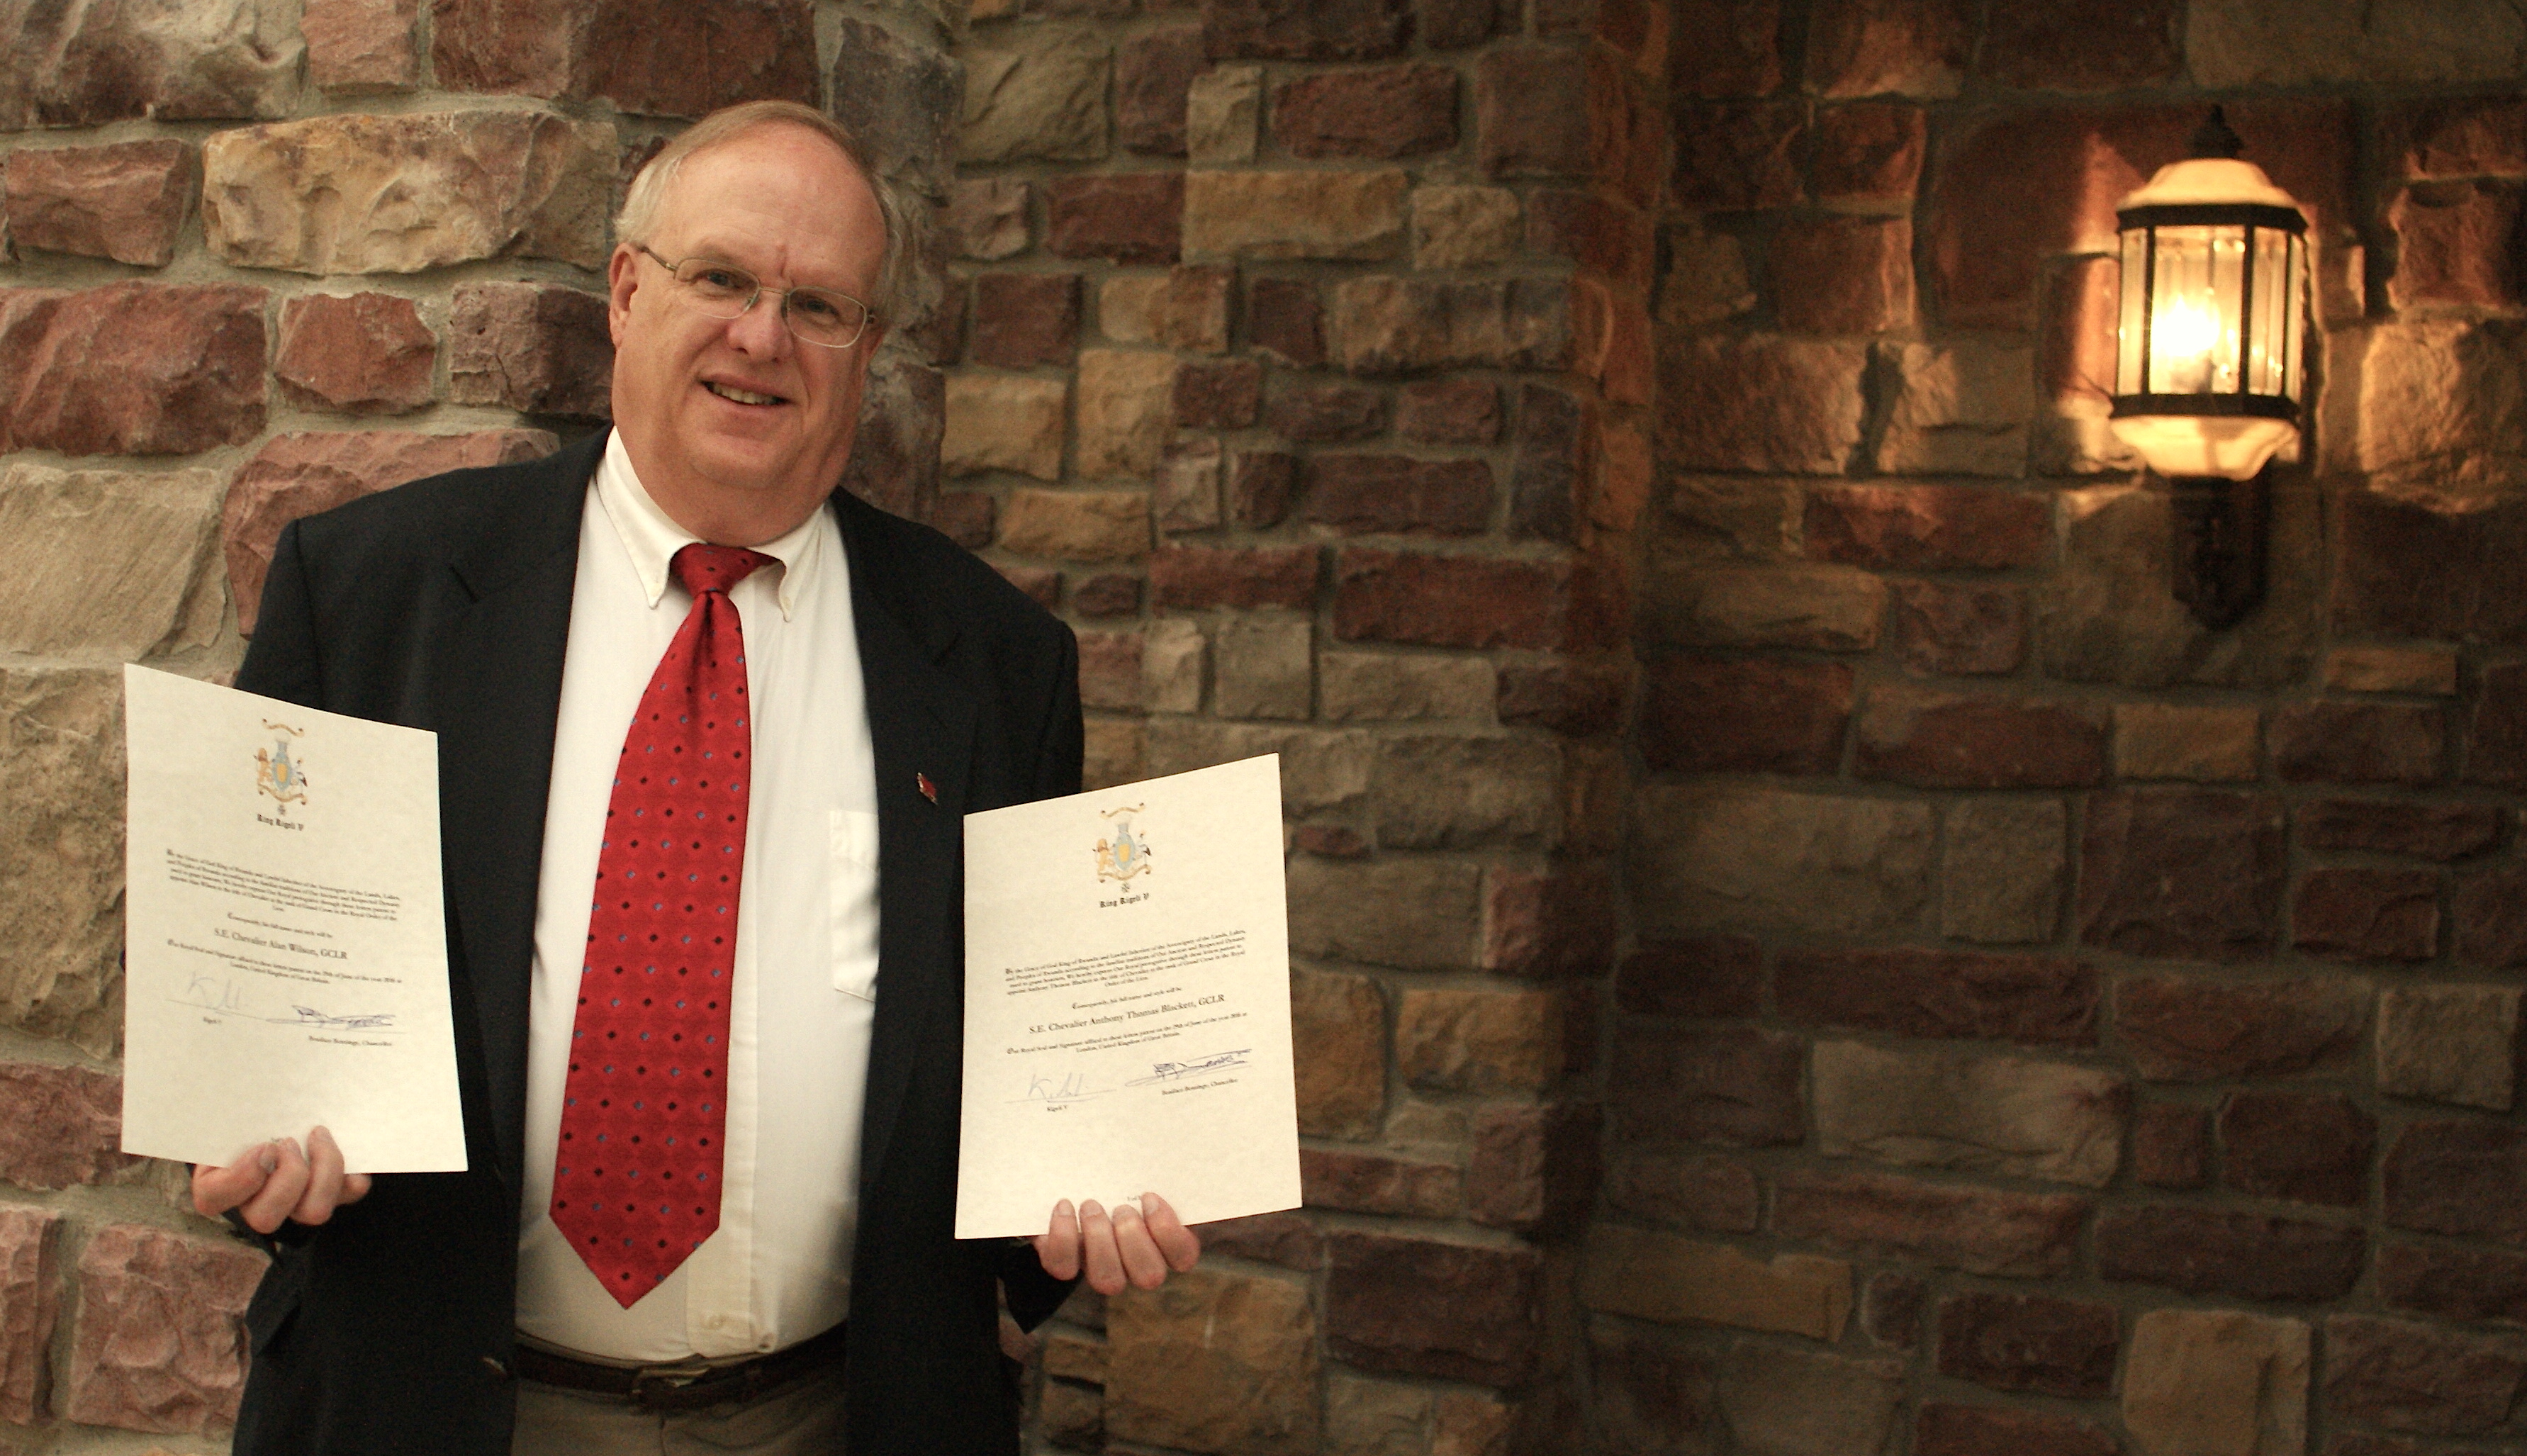 George Horwatt, President of The Welsh Cultural Endeavor of Northeastern Pennsylvania, holds proclamations signed by King Kigeli V of Rwanda to knight Welsh Researchers Alan Wilson and Baram Blackett.